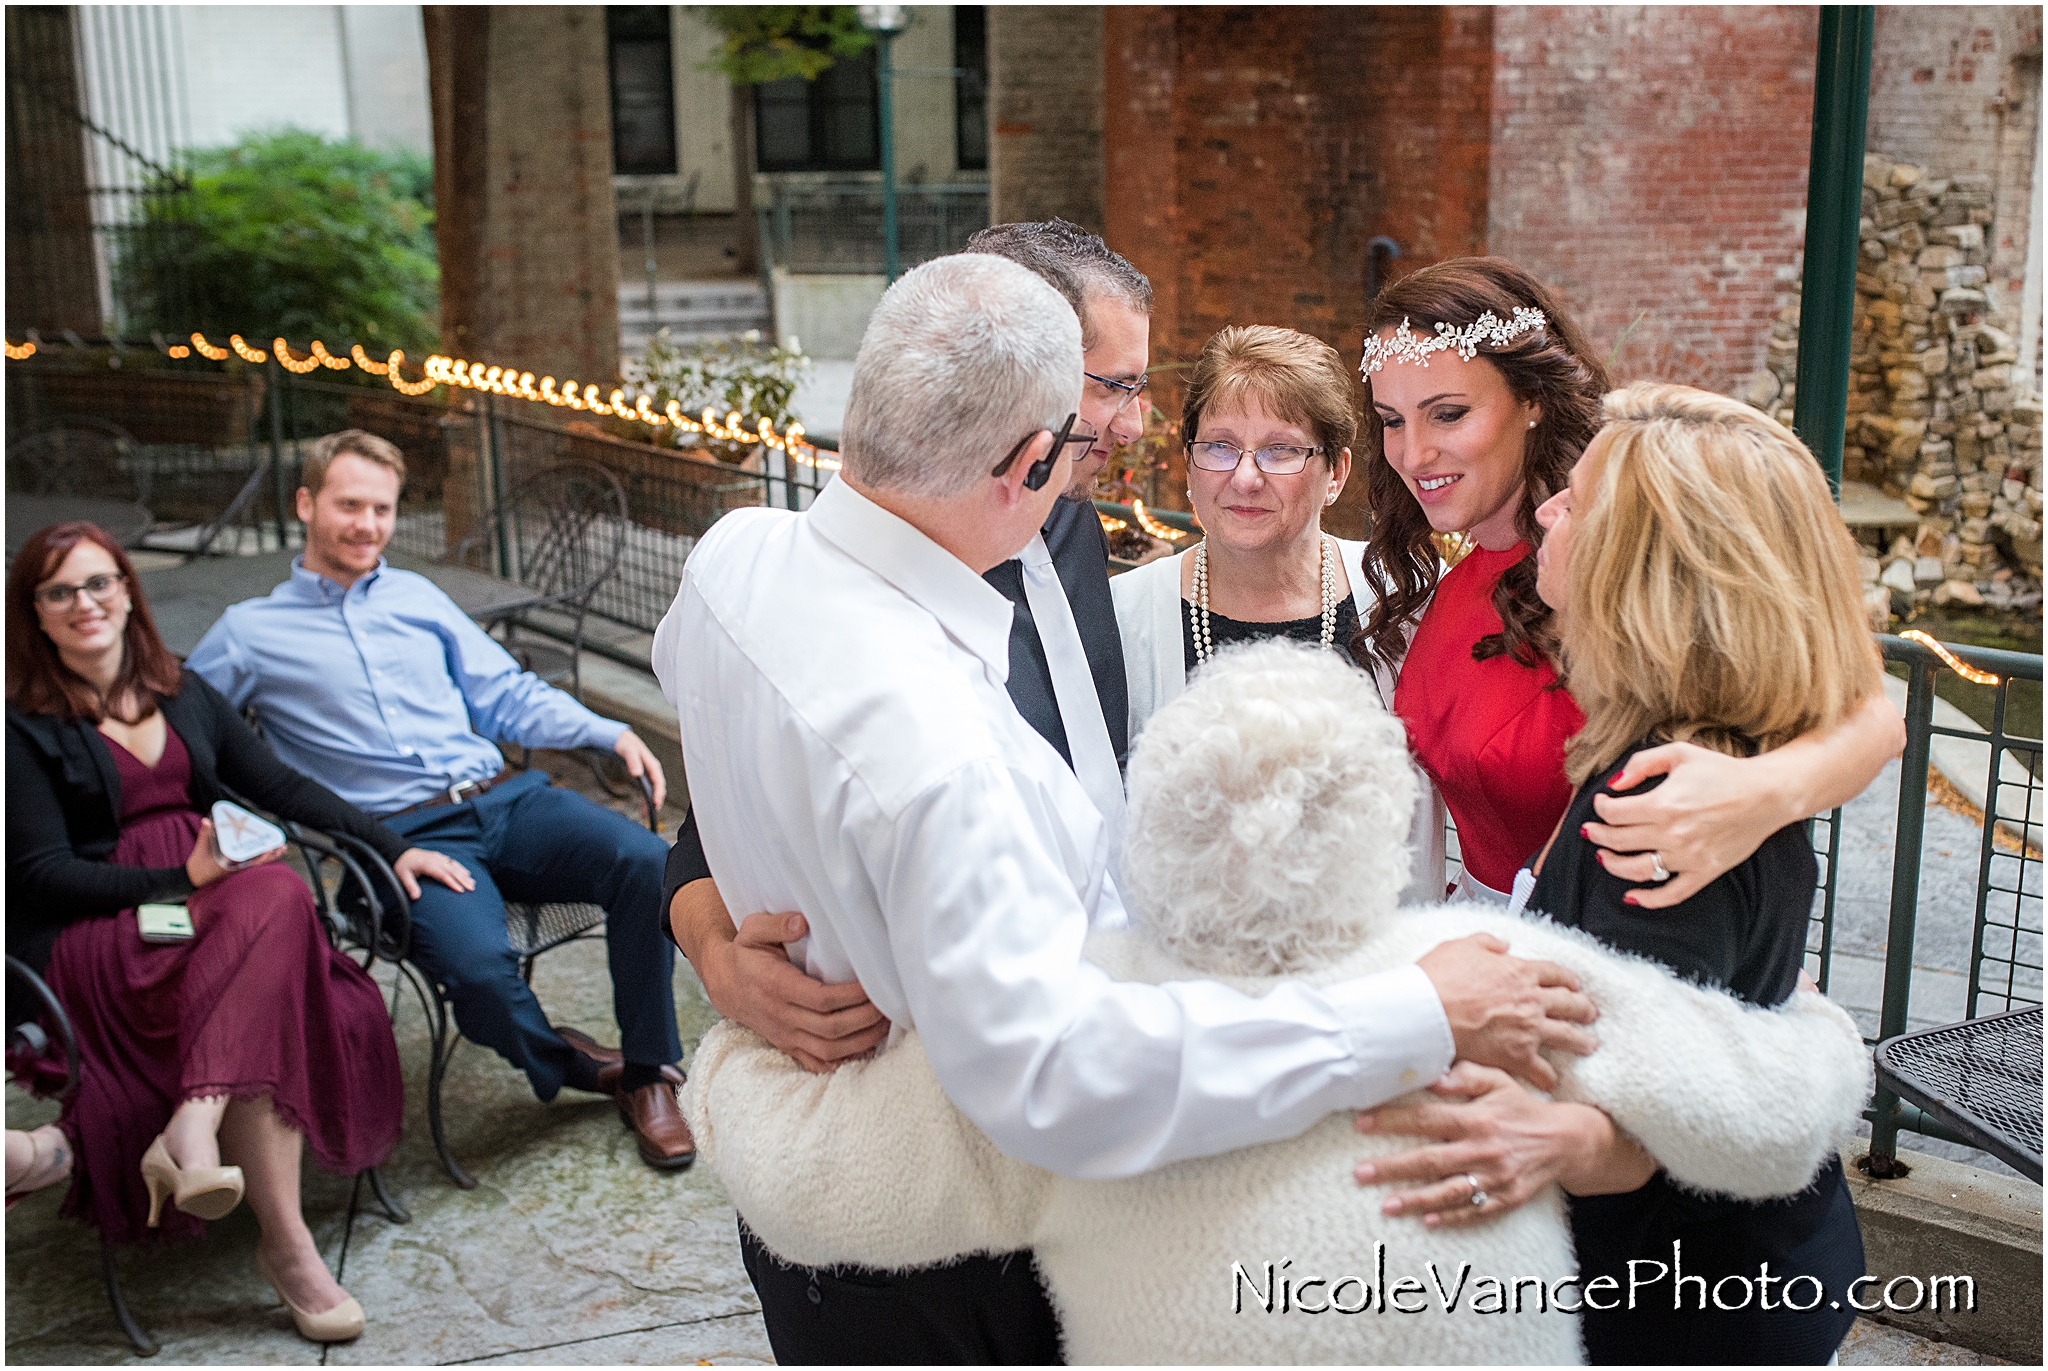 The whole family embraces after a wedding ceremony at Bookbinders on the back patio.